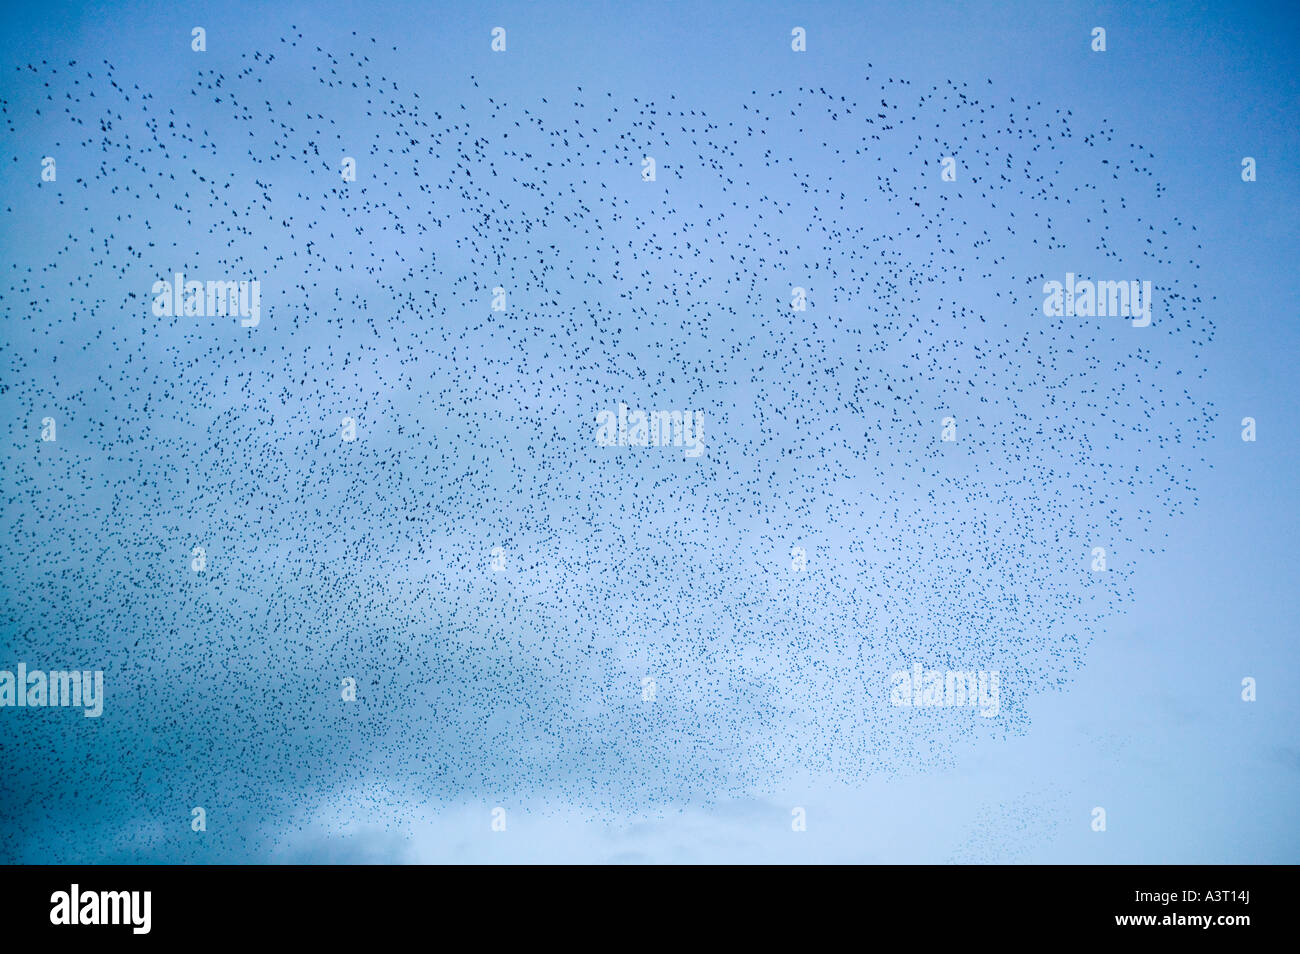 Starlings flocking prior to roost, near Kendal, Cumbria, UK Stock Photo